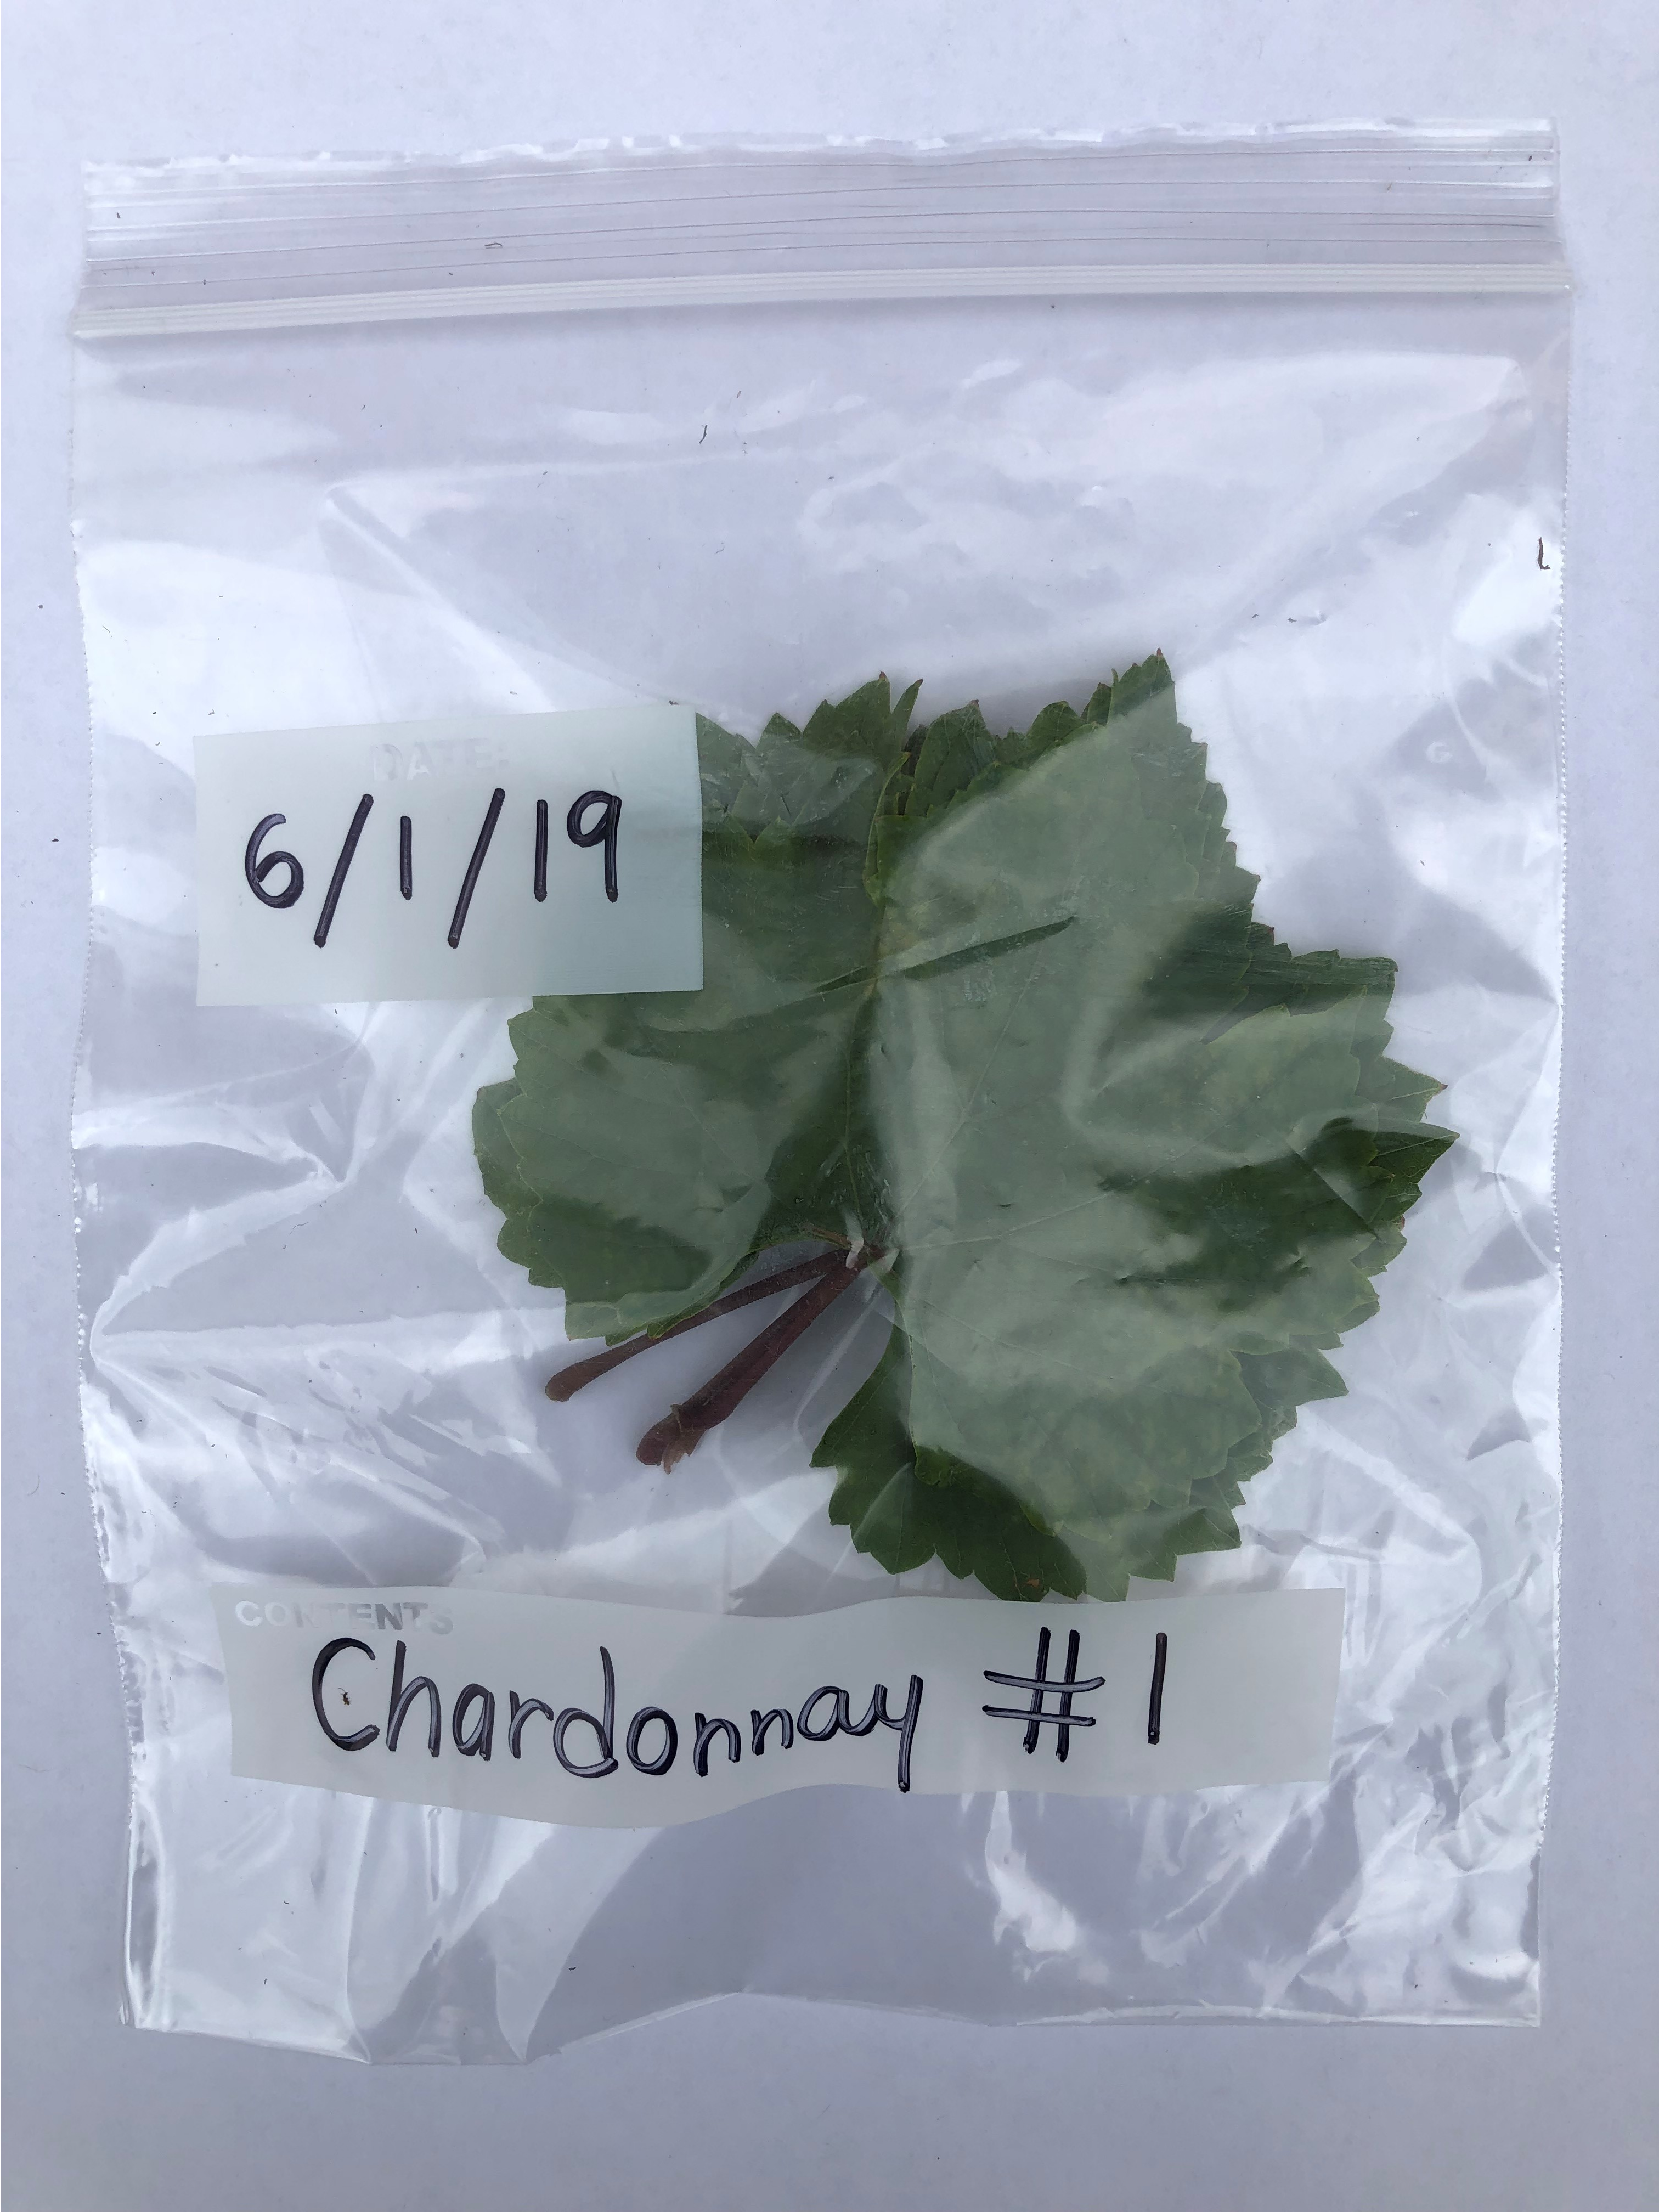 A picture of a grape leaf sample taken from a single vine.